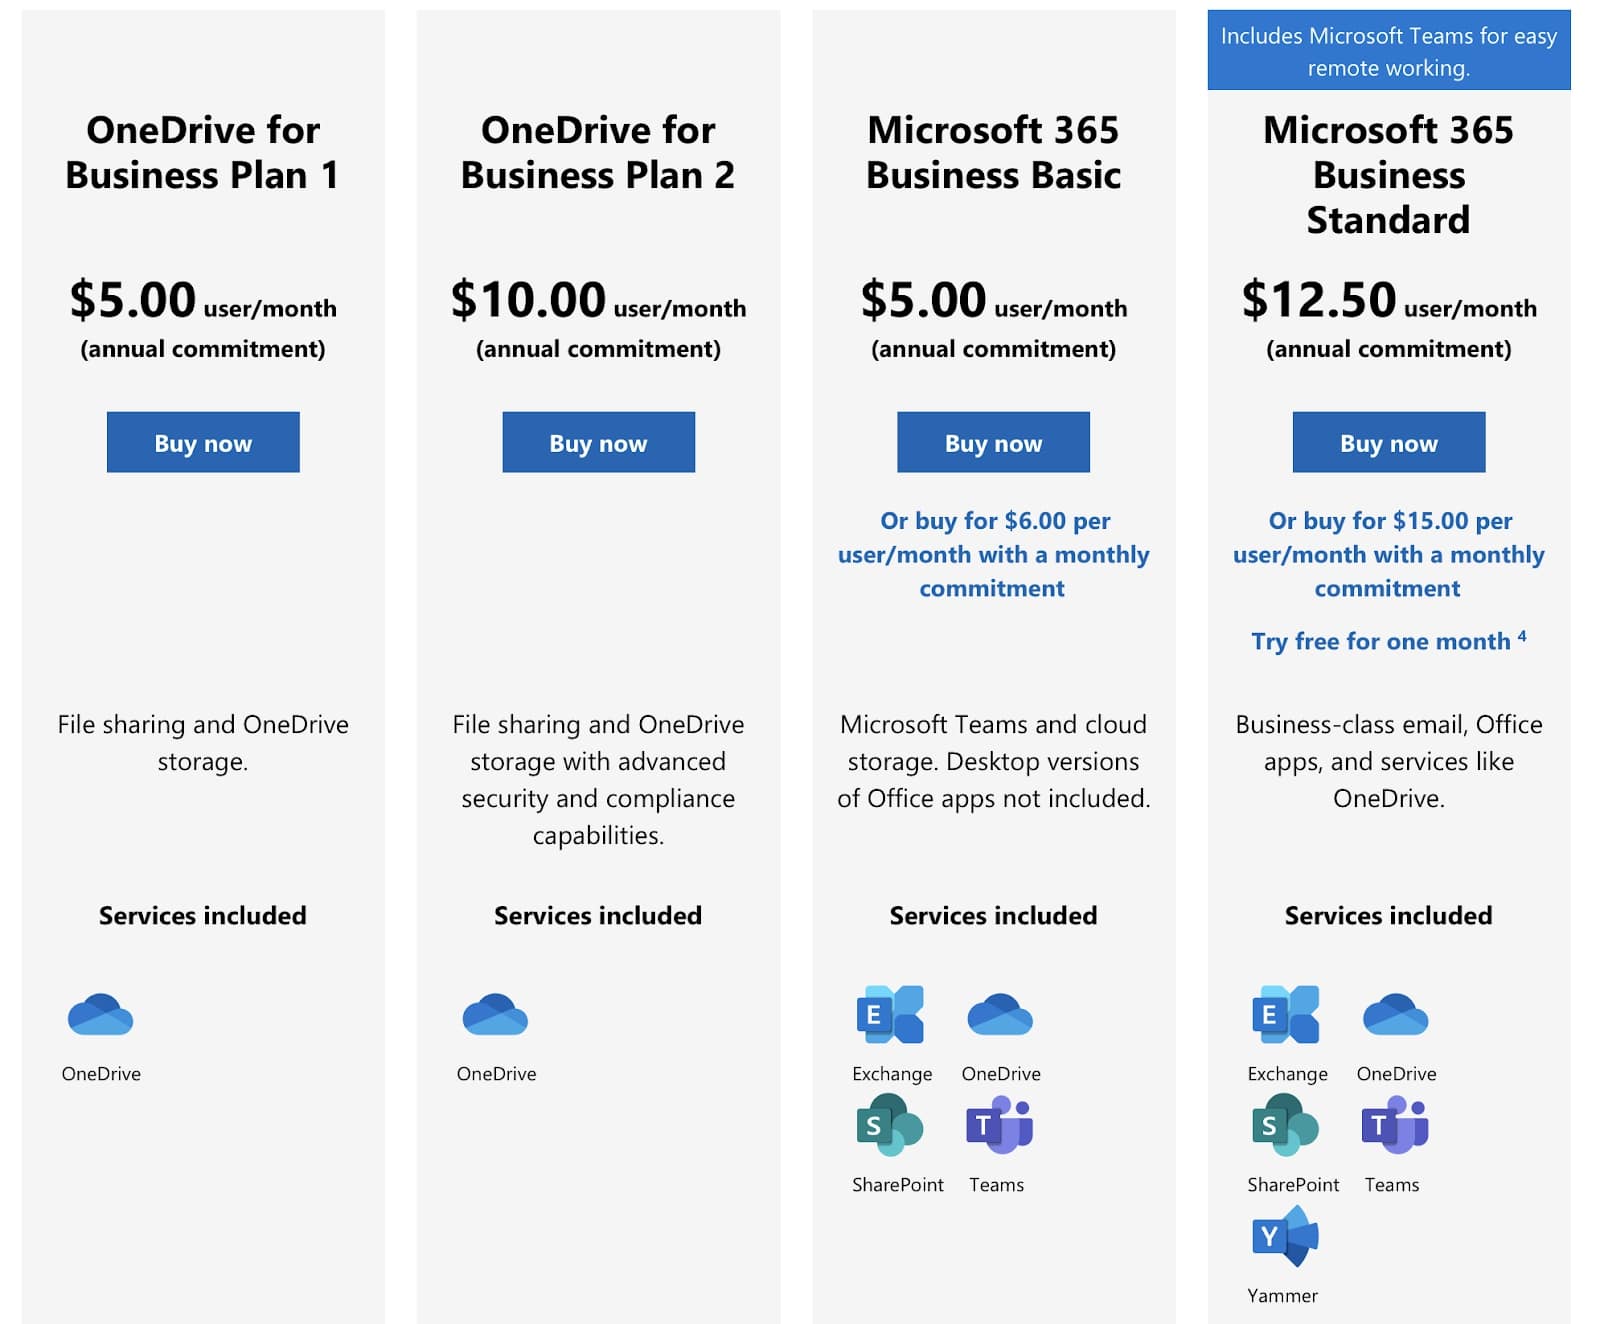 onedrive for business plan 1 cost